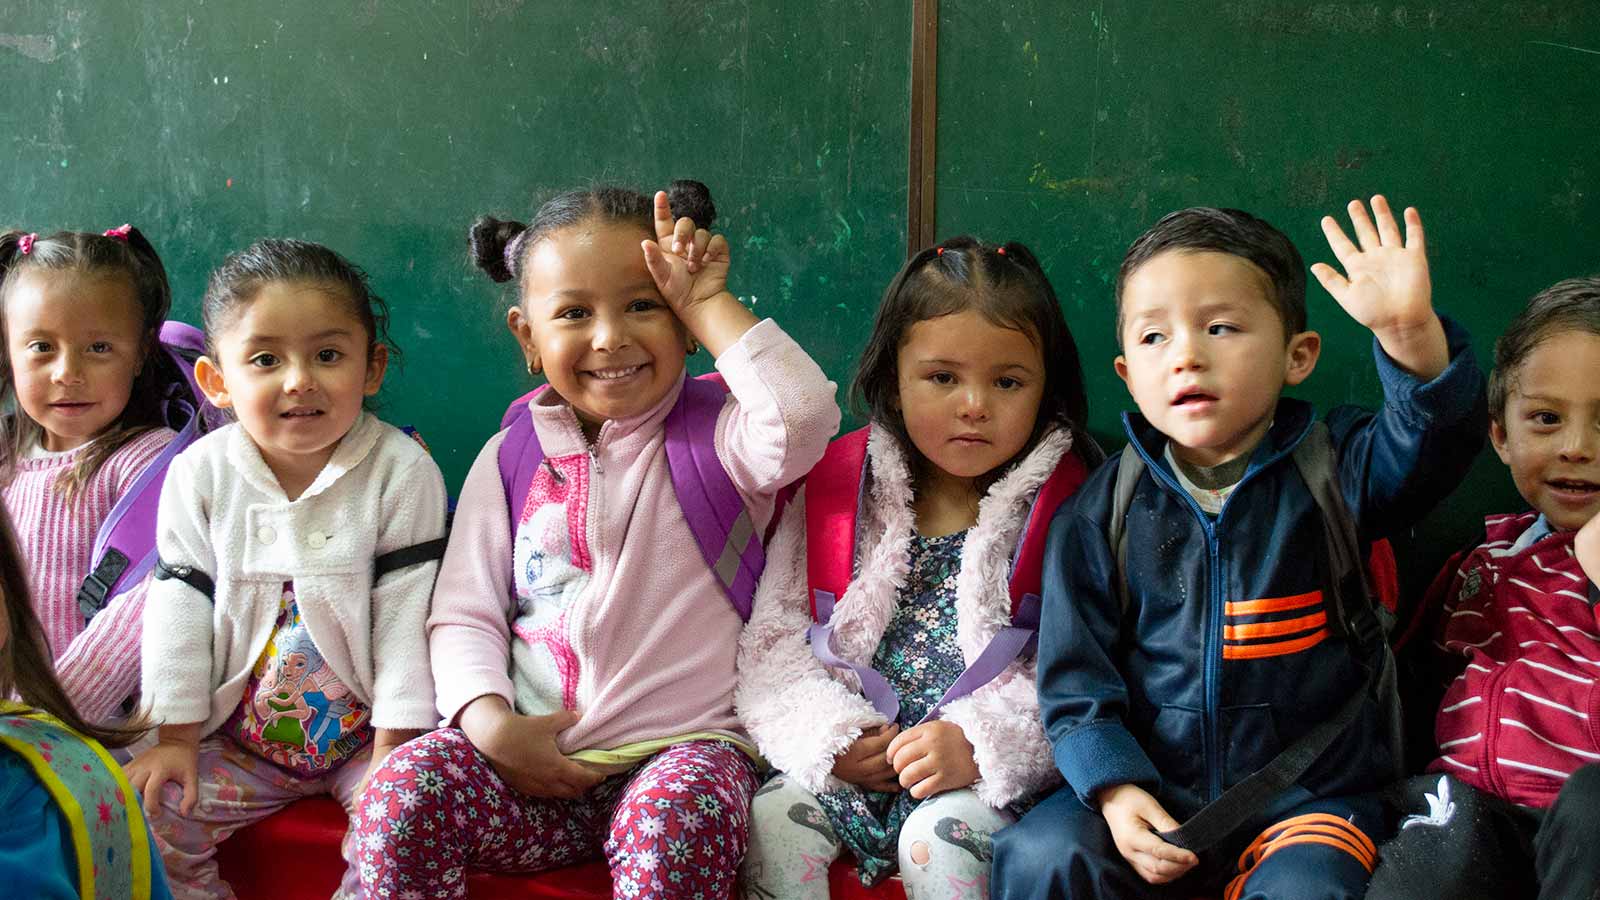 preschool children in Colombia waiting on a bench